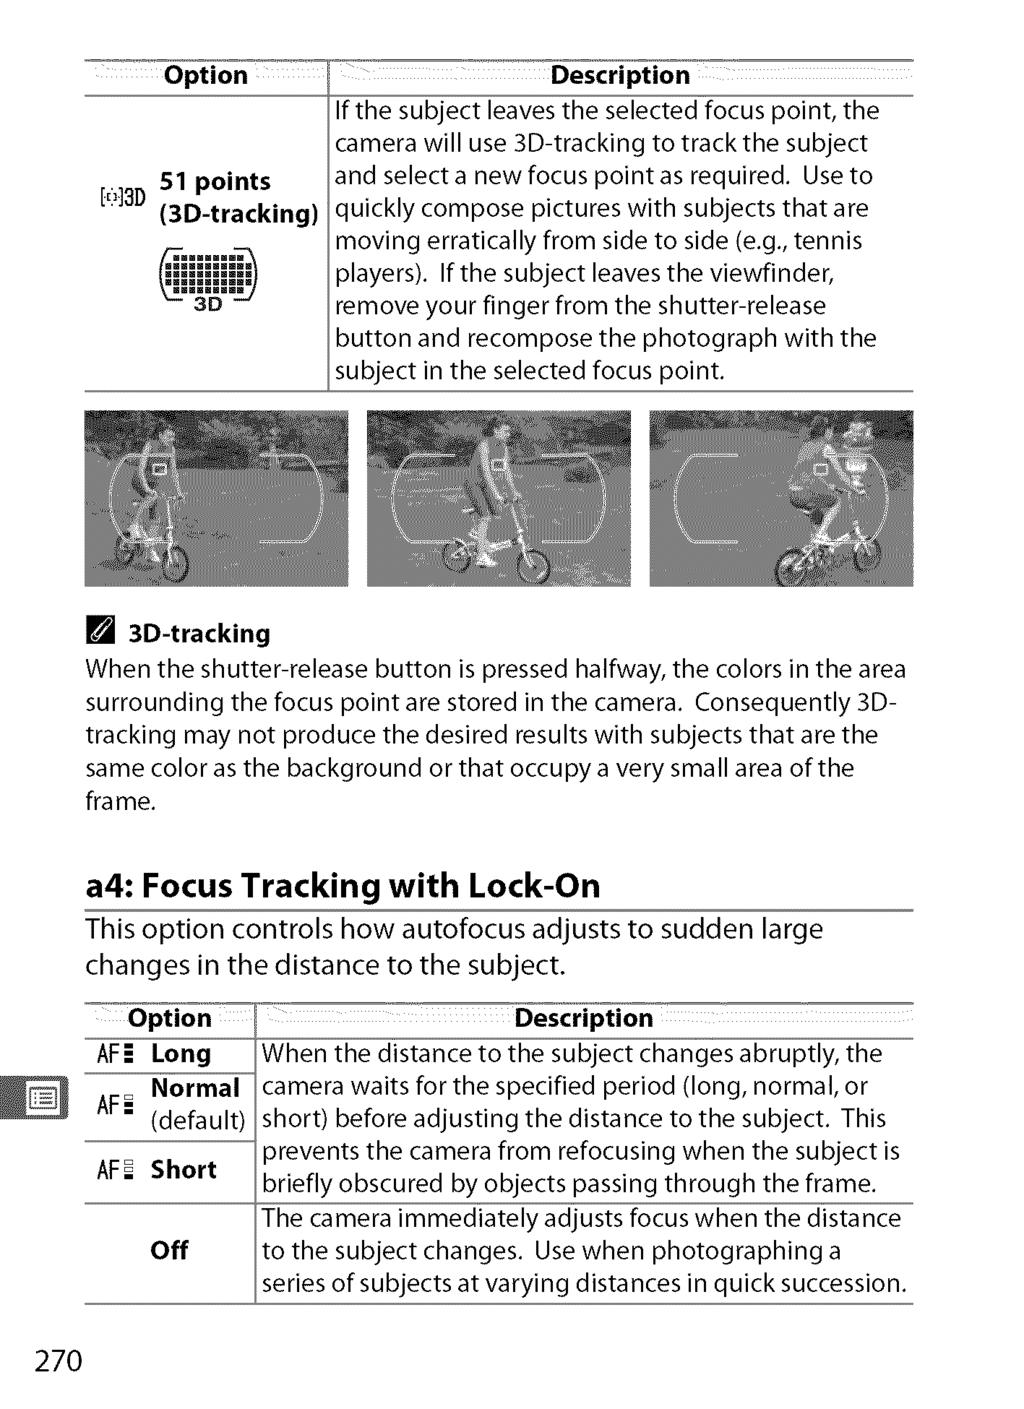 Option 51 points (3D-tracking) Description If the subject leaves the selected focus point, the camera will use 3D-tracking to track the subject and select a new focus point as required.